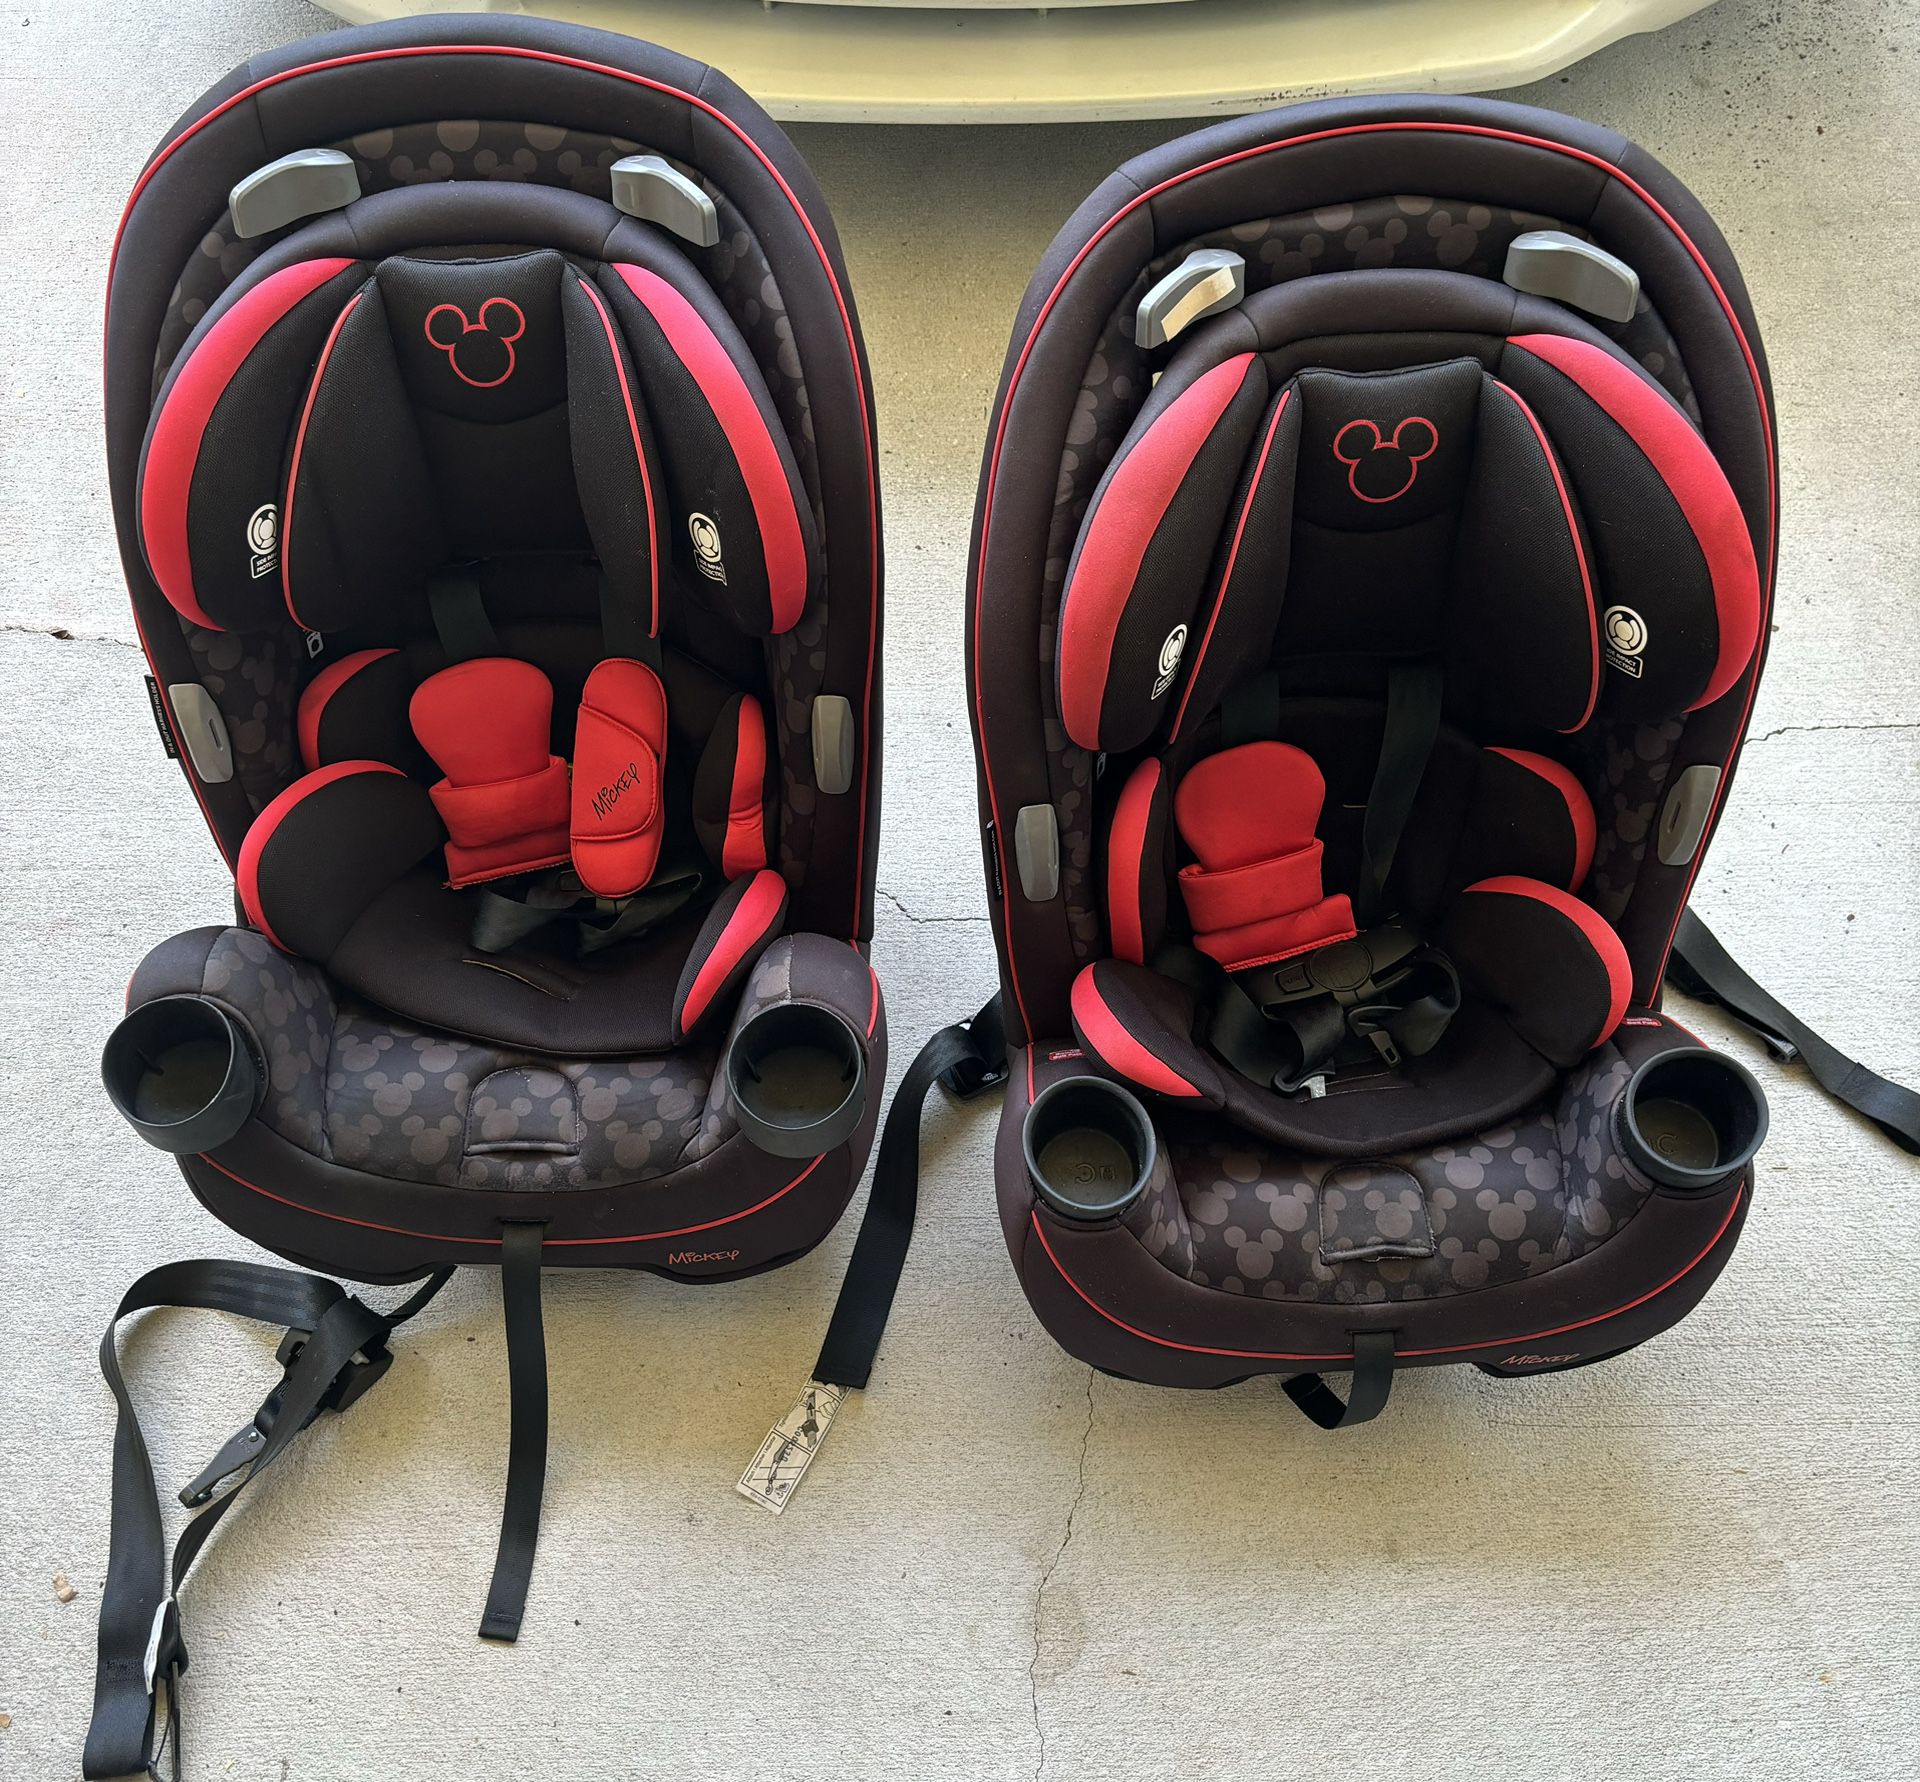 Safety First Mickey Mouse Car Seats 